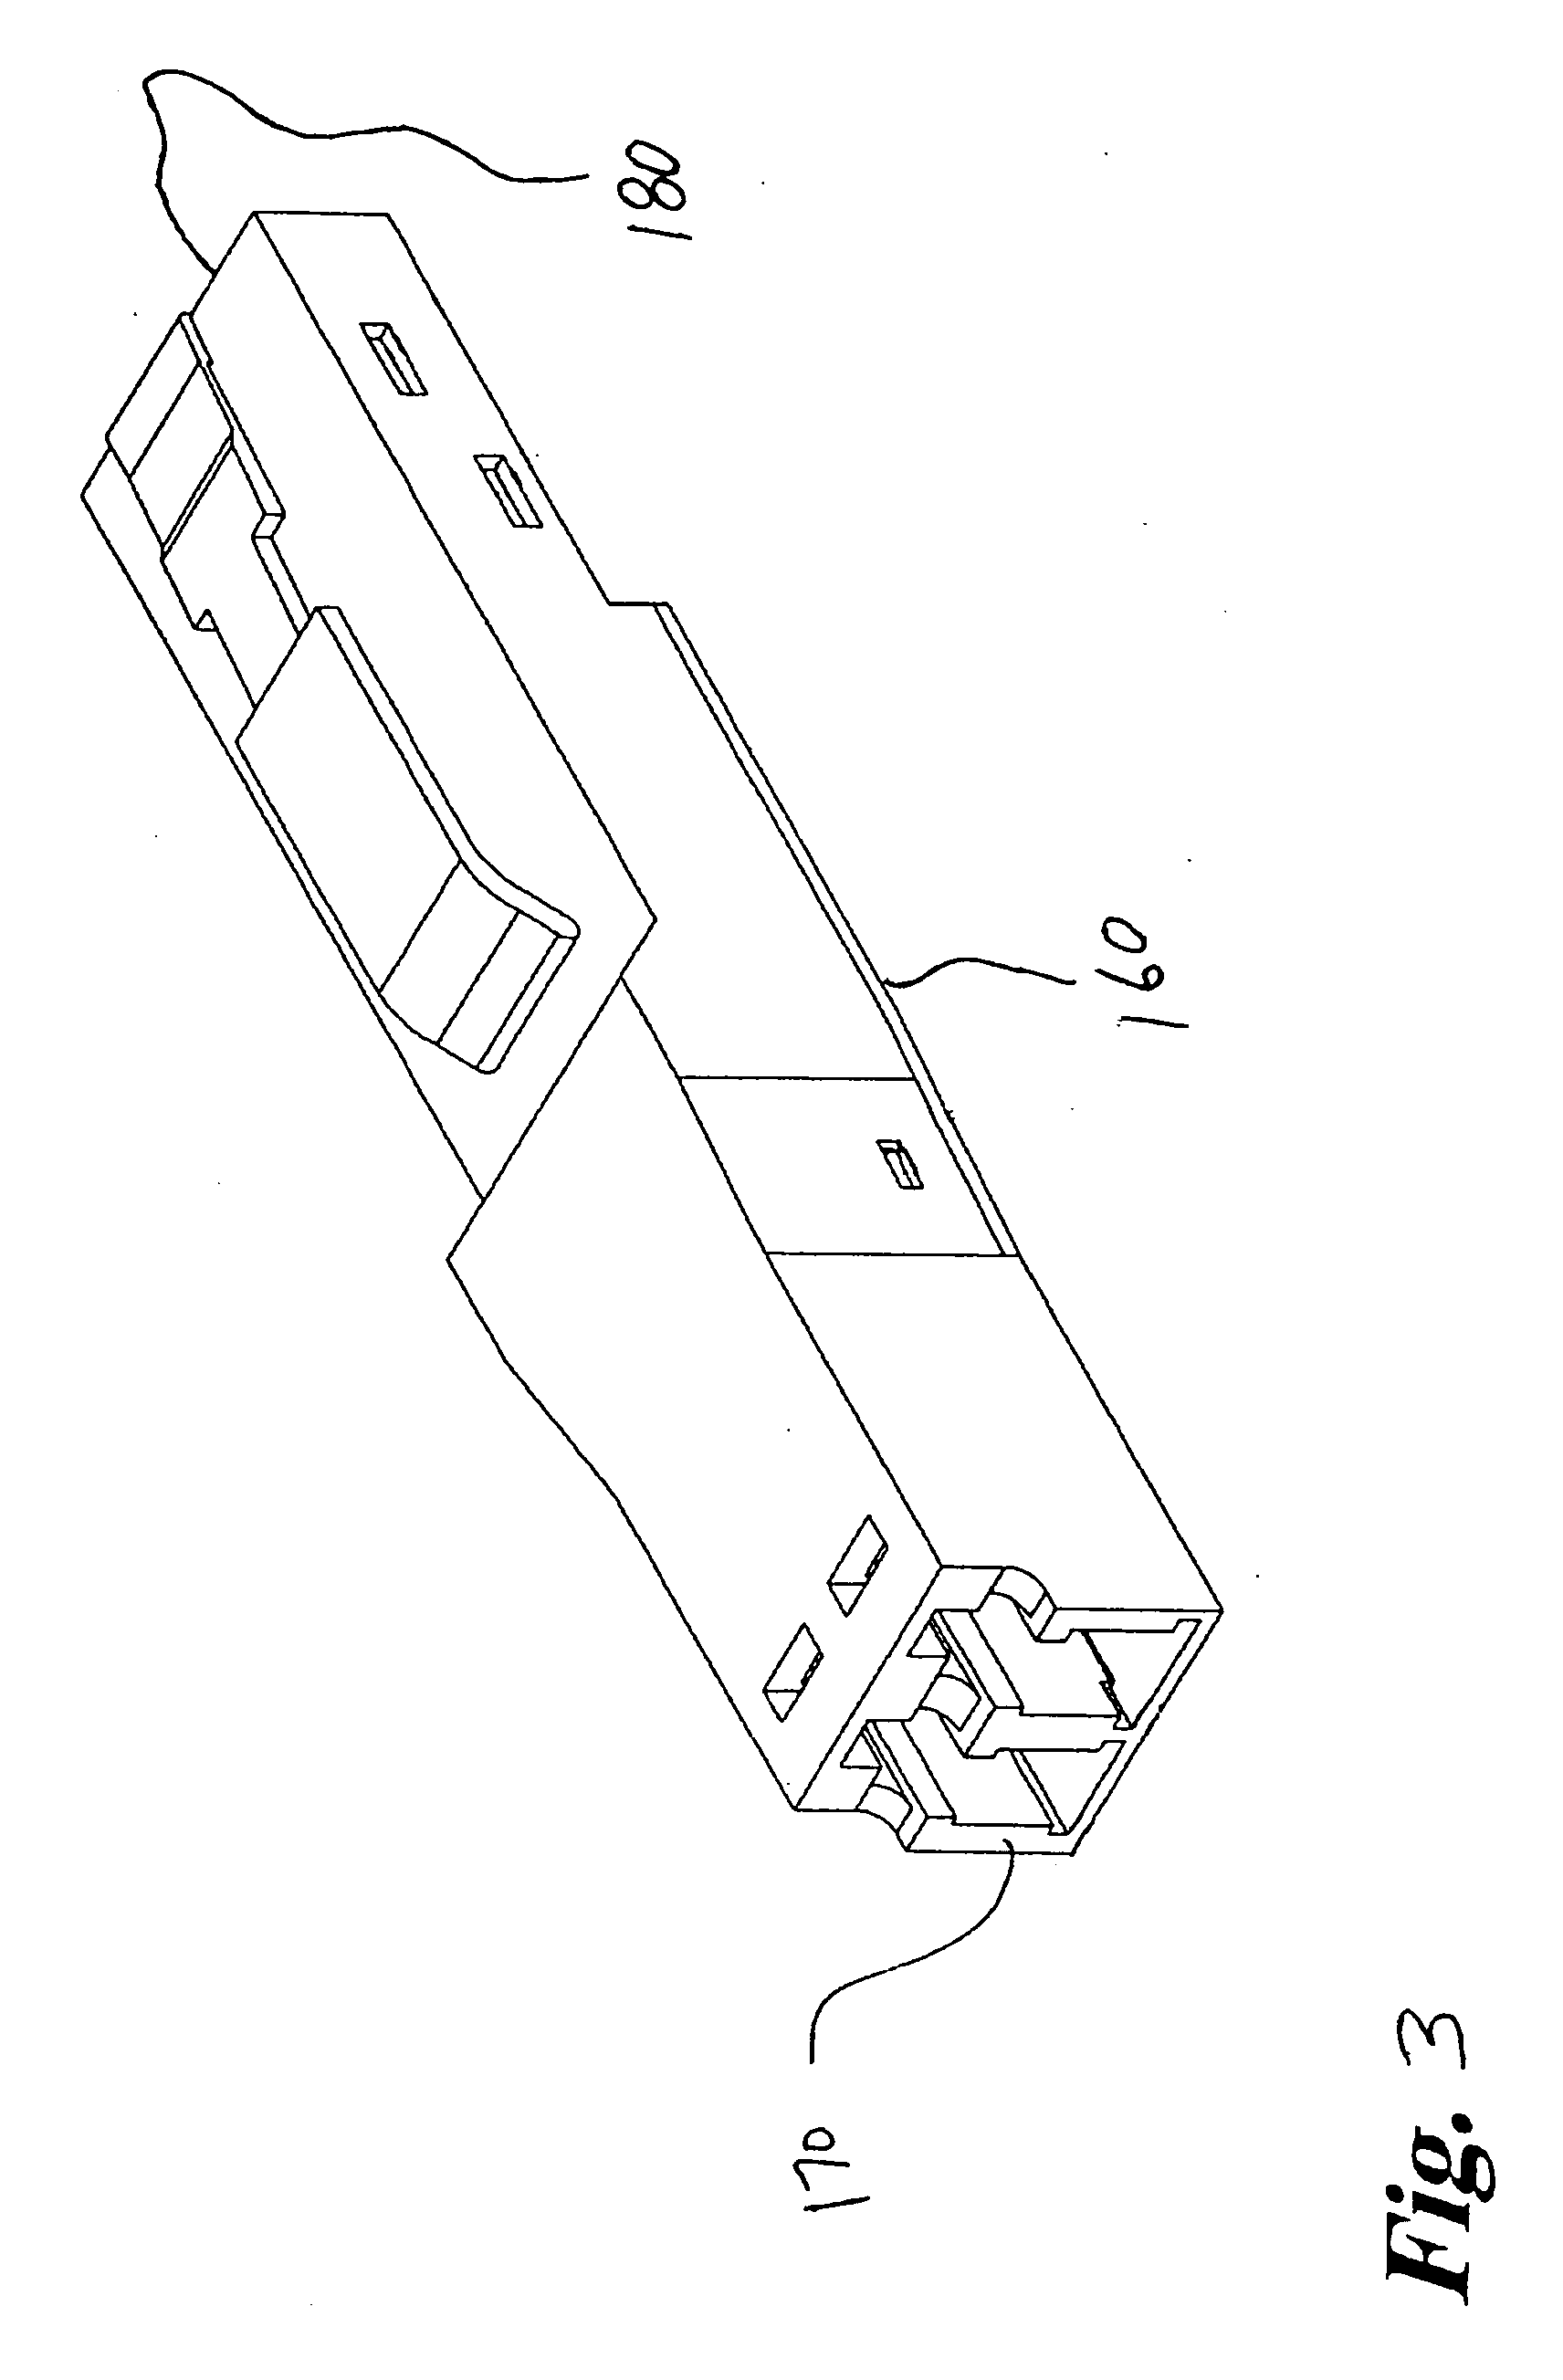 Radio frequency identification of a connector by a patch panel or other similar structure